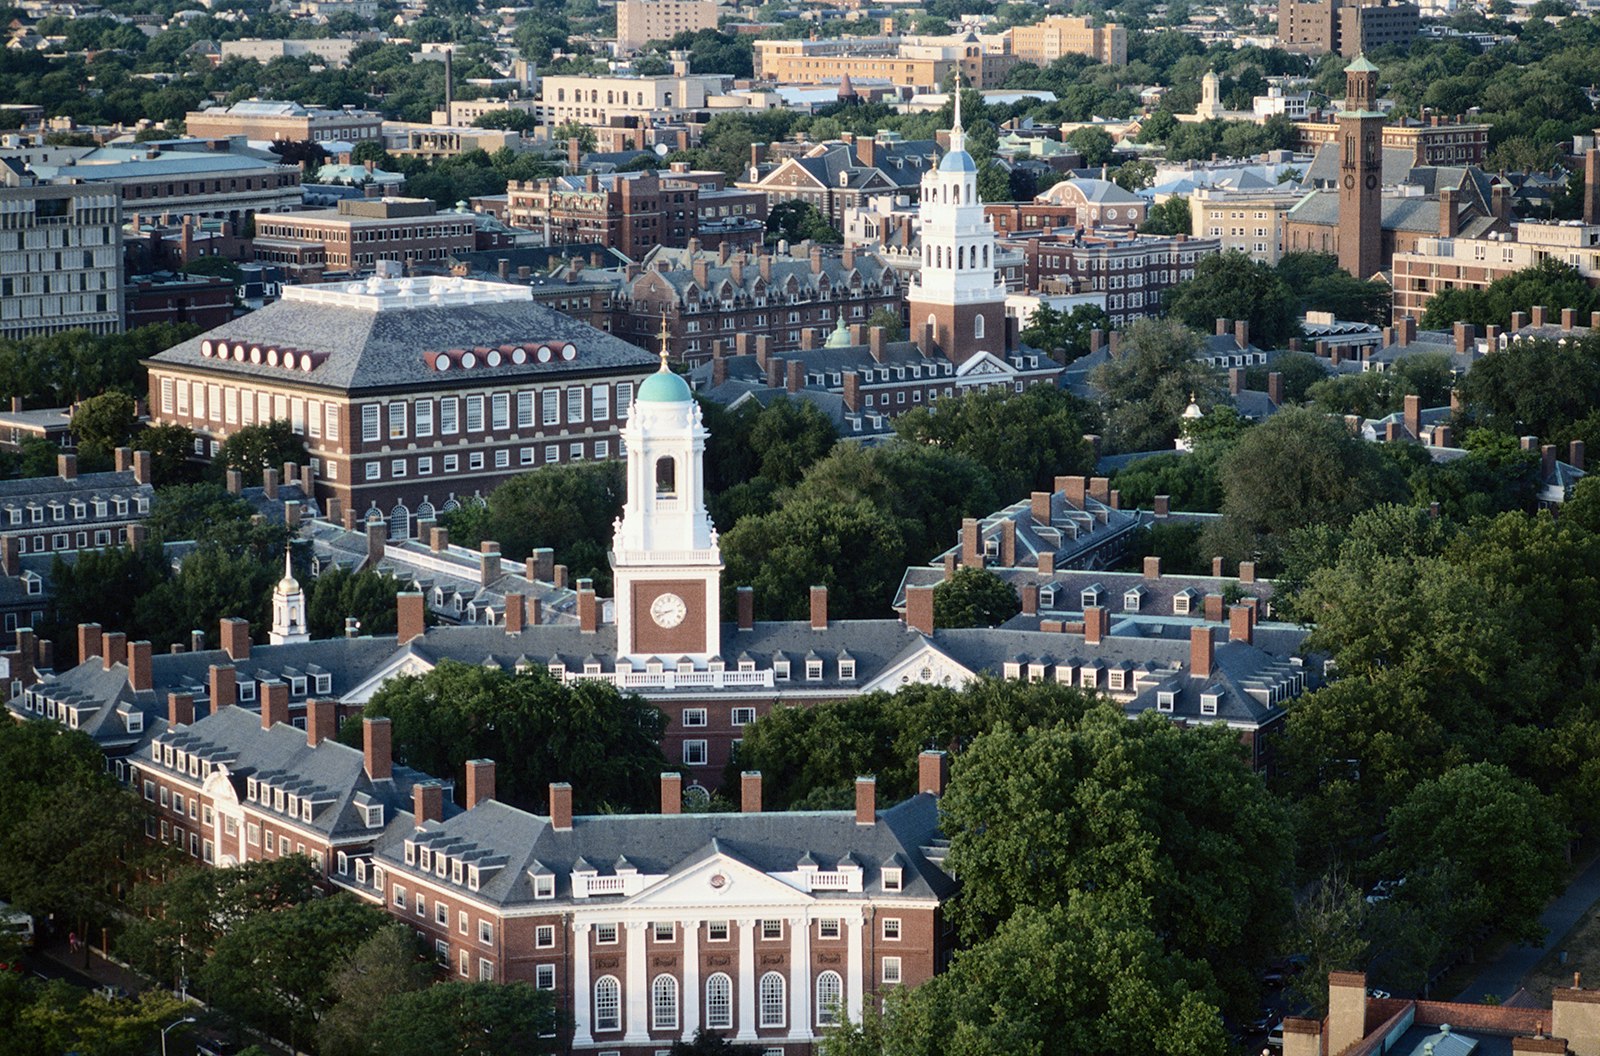 An aerial view of the steepled red-brick buildings of Harvard University in the summer